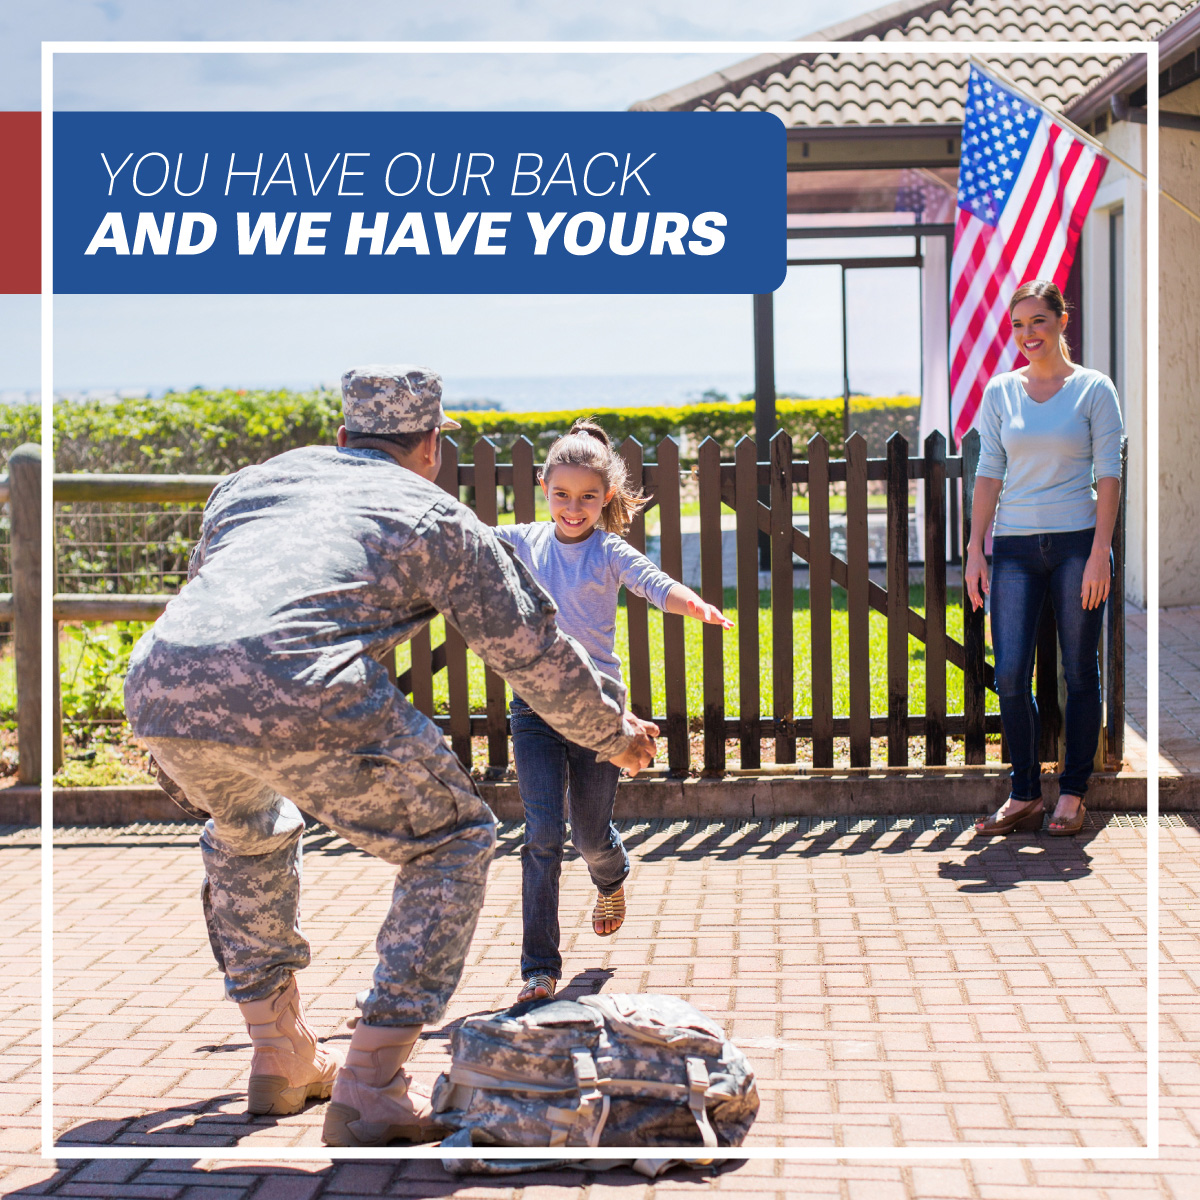 As a service member, you’re eligible for special mortgage benefits. Message me for more information. #VALoans #ColoradoSpringsRealEstate #NothingDown #GreatRates #FortCarson